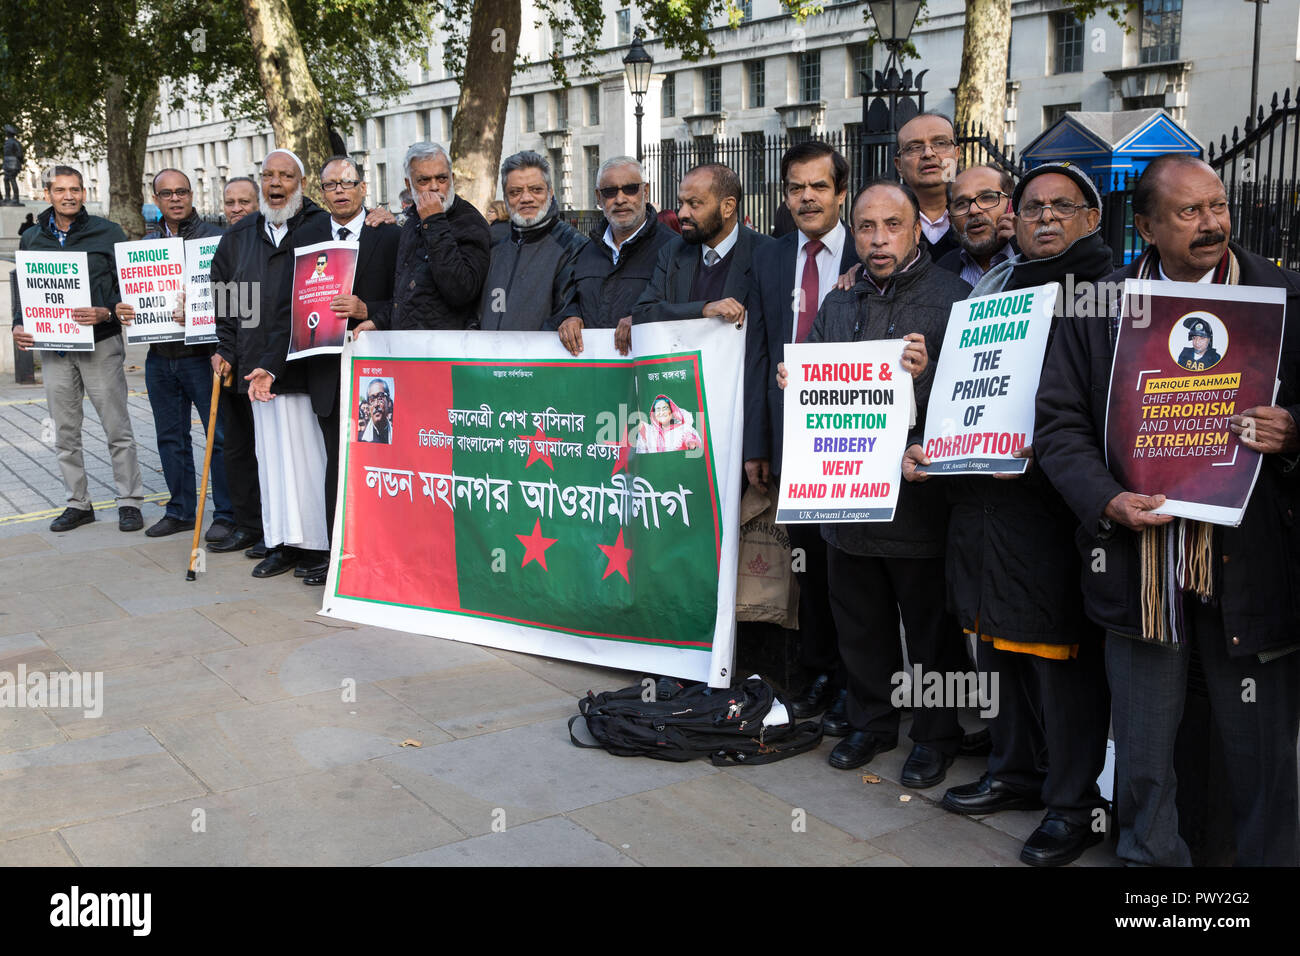 London, UK. 18th October, 2018. Campaigners from the UK Awami League, supporters of the current Government of Bangladesh under Prime Minister Sheikh Hasina, protest in Whitehall opposite Downing Street to call on the British Government to extradite Tarique Rahman, acting chairman of Bangladesh Nationalist Party, to Bangladesh. Tarique Rahman successfully applied for political asylum in the UK in 2008 and has since been granted indefinite leave to remain. Credit: Mark Kerrison/Alamy Live News Stock Photo